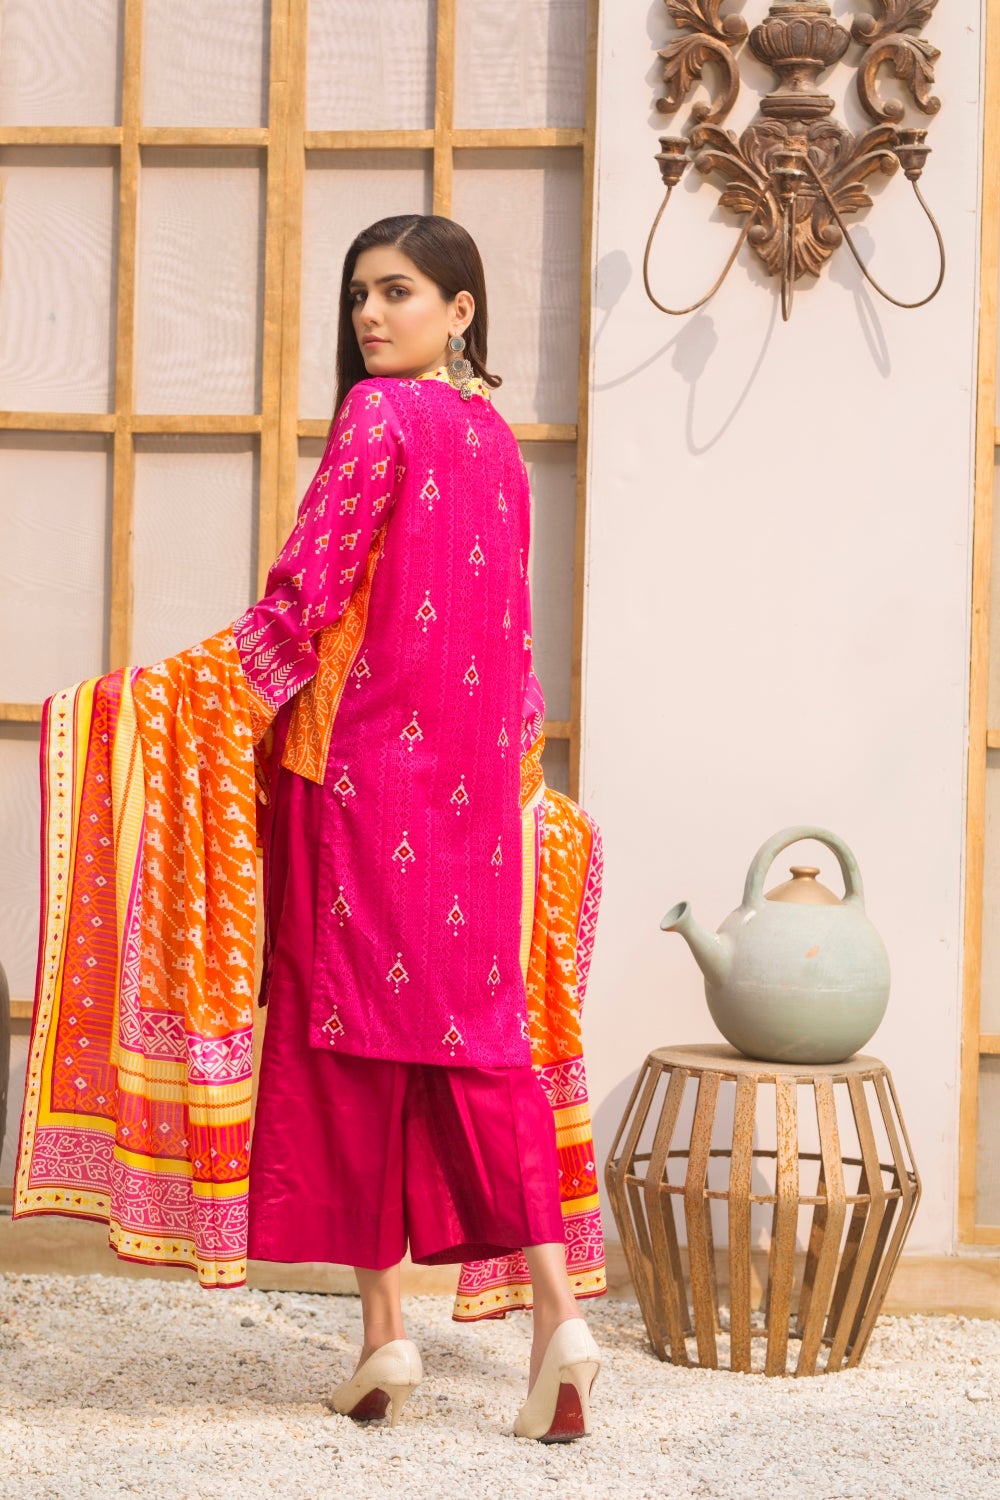 Ittehad Crystal Printed Lawn Unstitched 3 Piece Suit - LF-CL-21130-A - Summer Collection